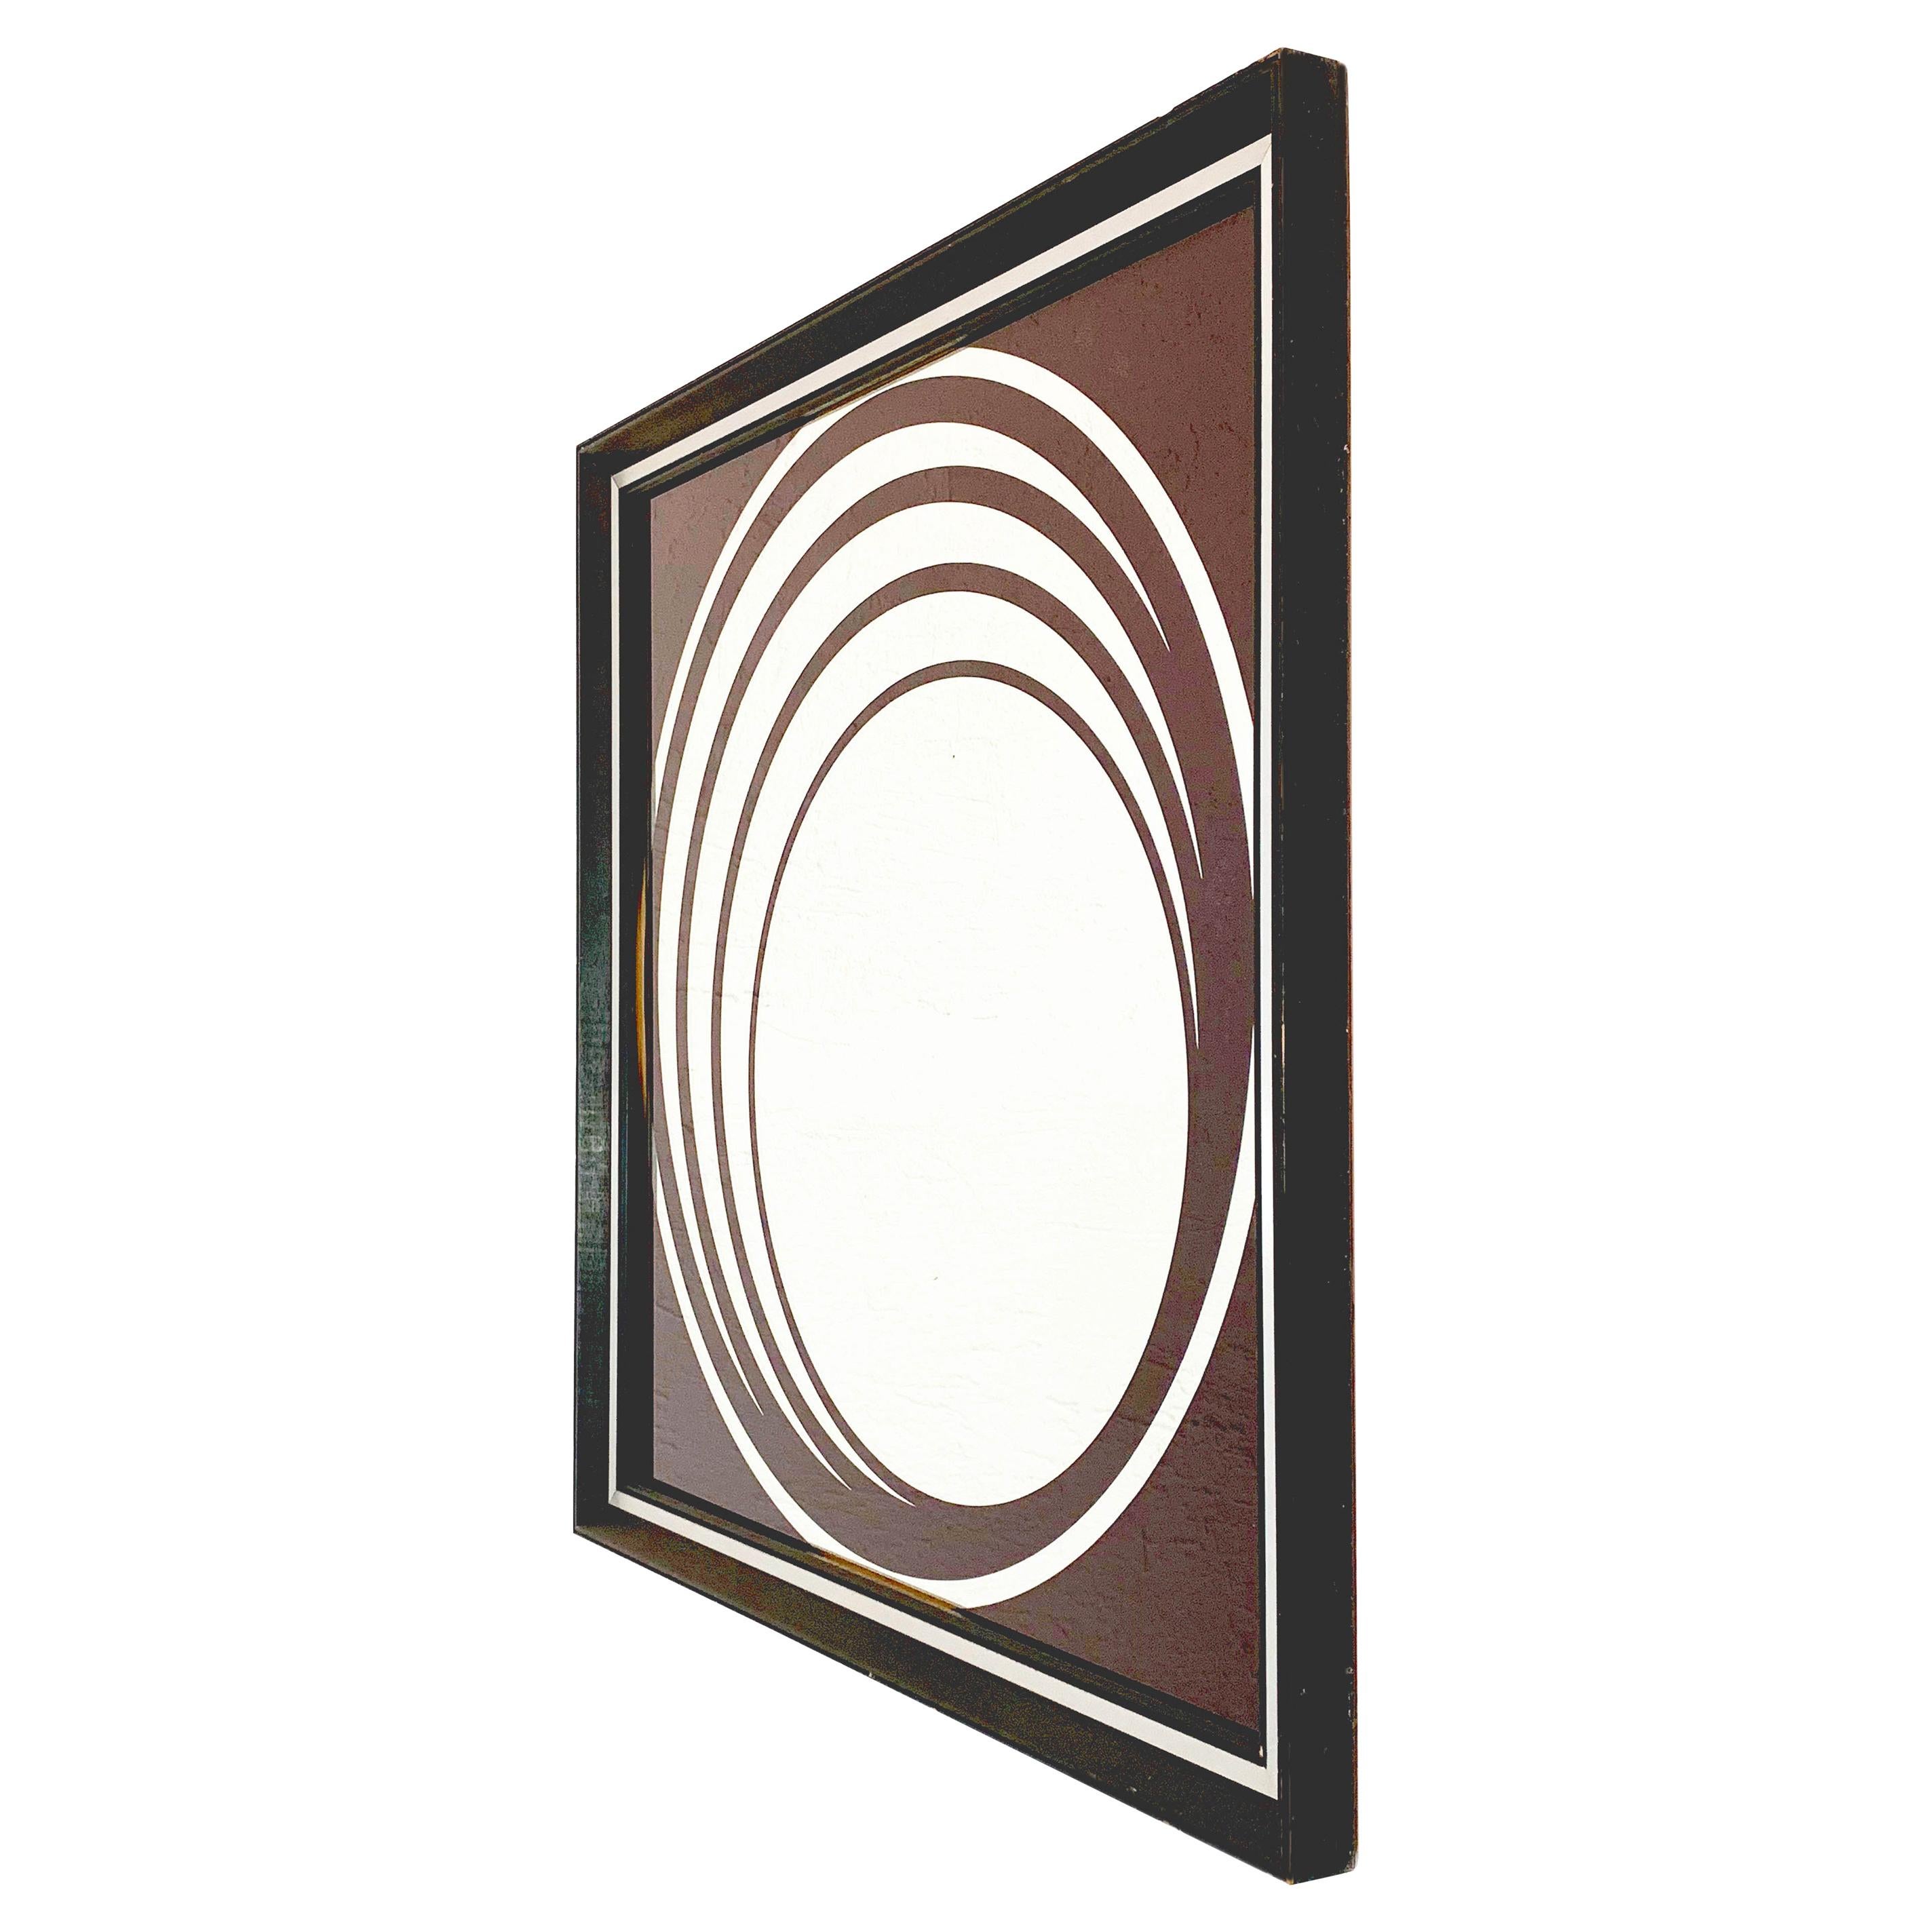 Midcentury British Burgundy Wall Mirror with Optical Effect after Verner Panton